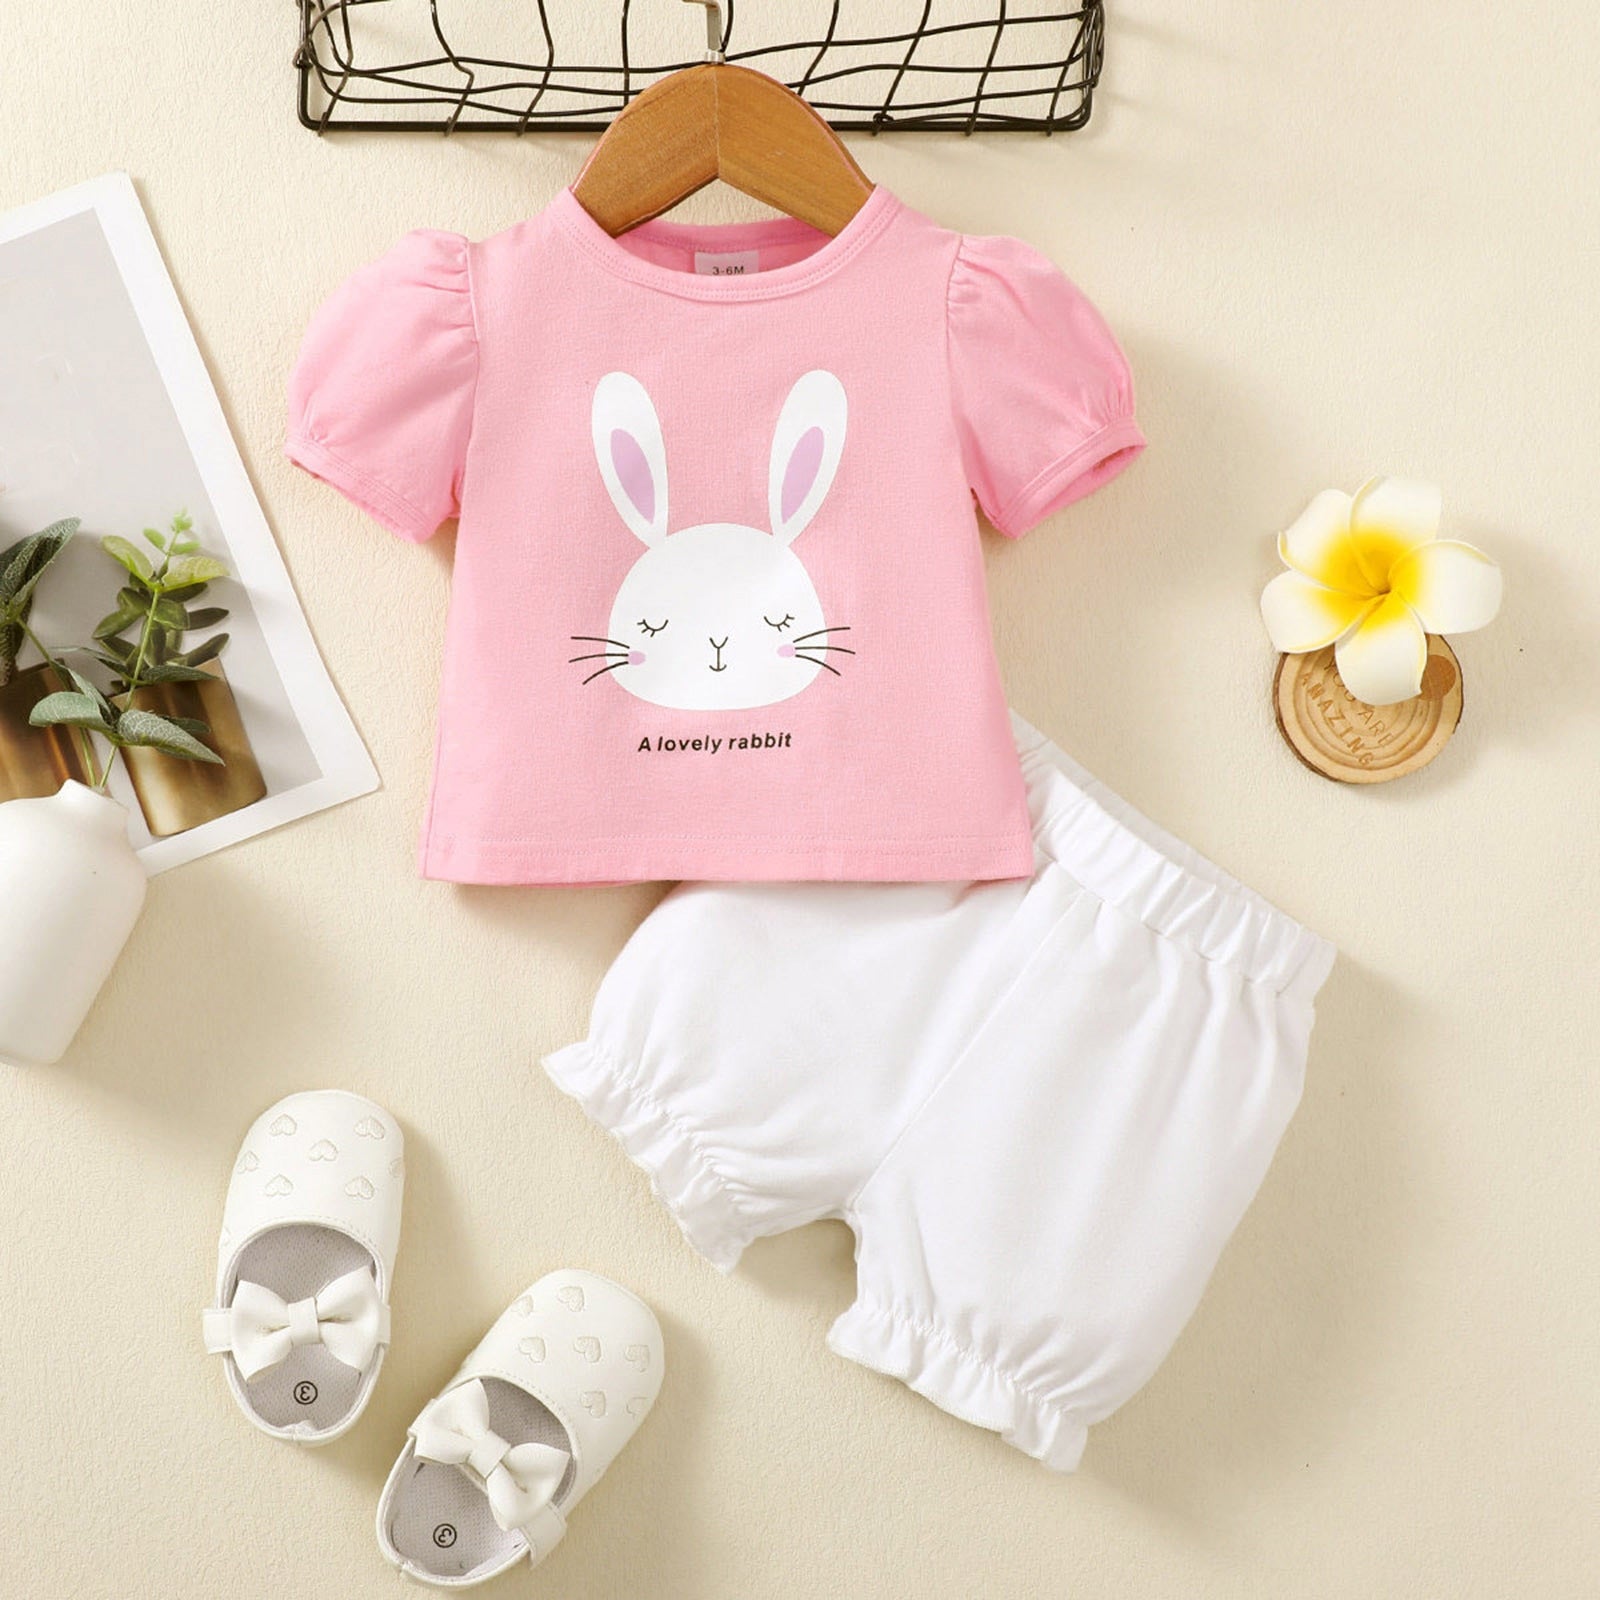 Adorable Infant Baby Easter Outfits Sets for Girls with Rabbit T-shirts and Shorts